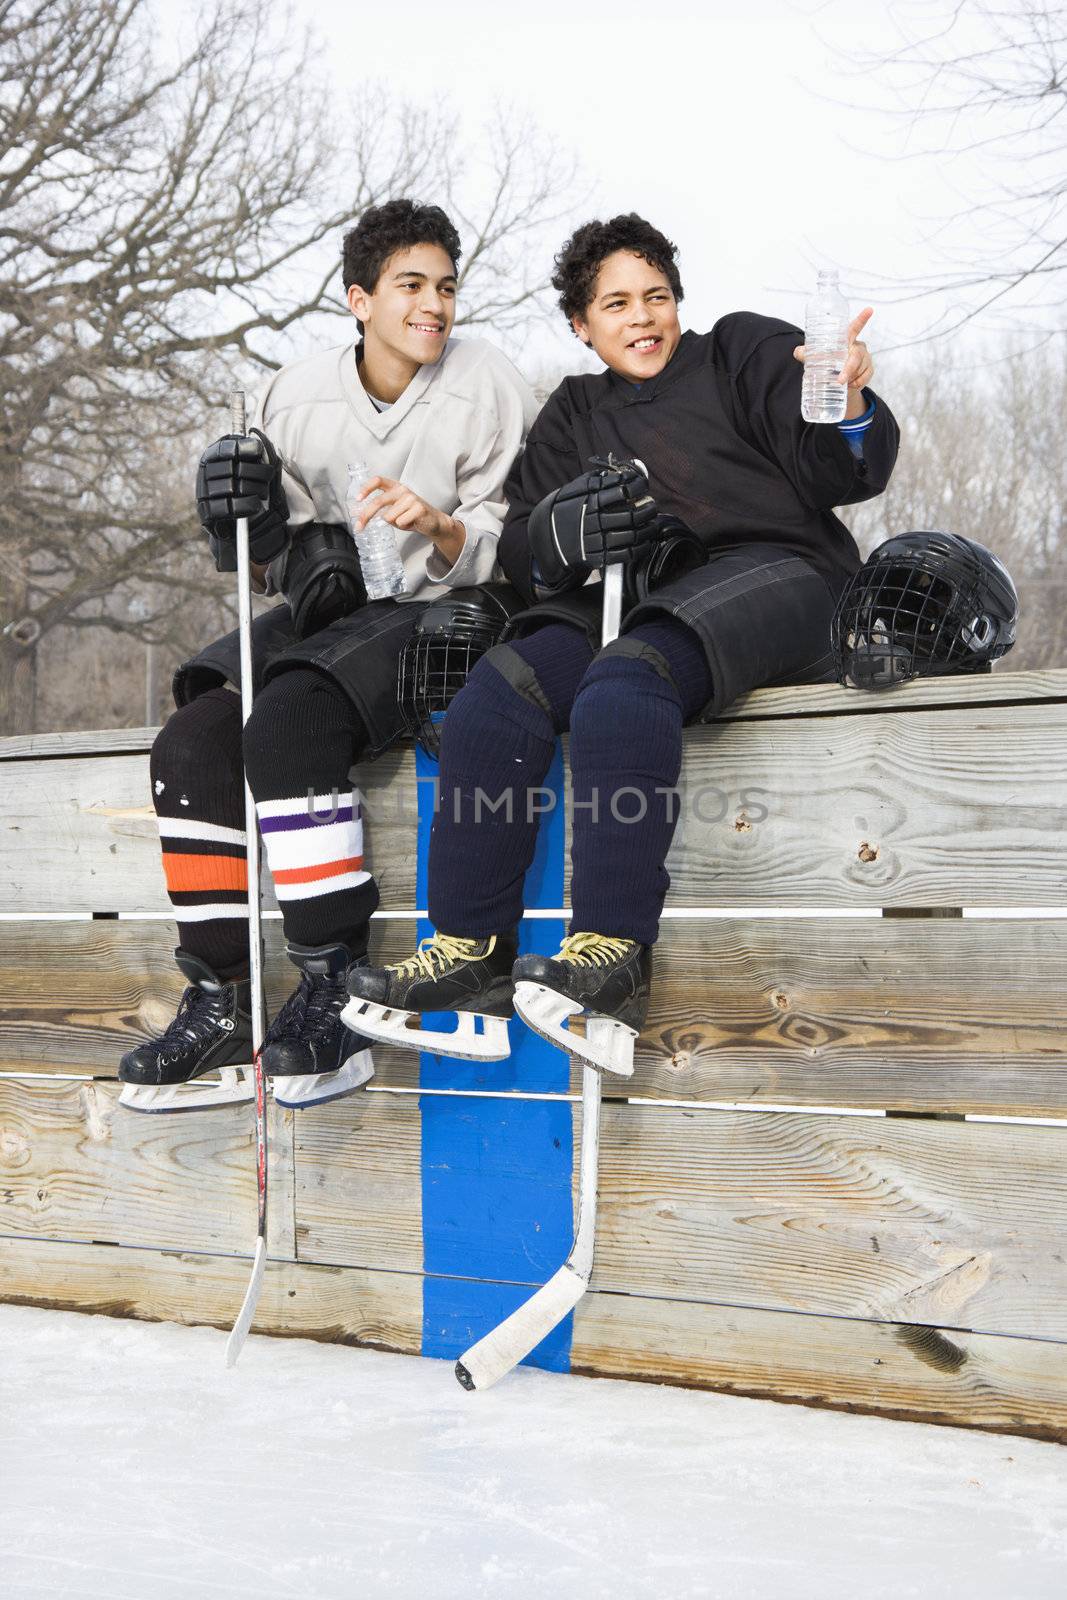 Two boys in ice hockey uniforms sitting on ice rink sidelines pointing and looking.